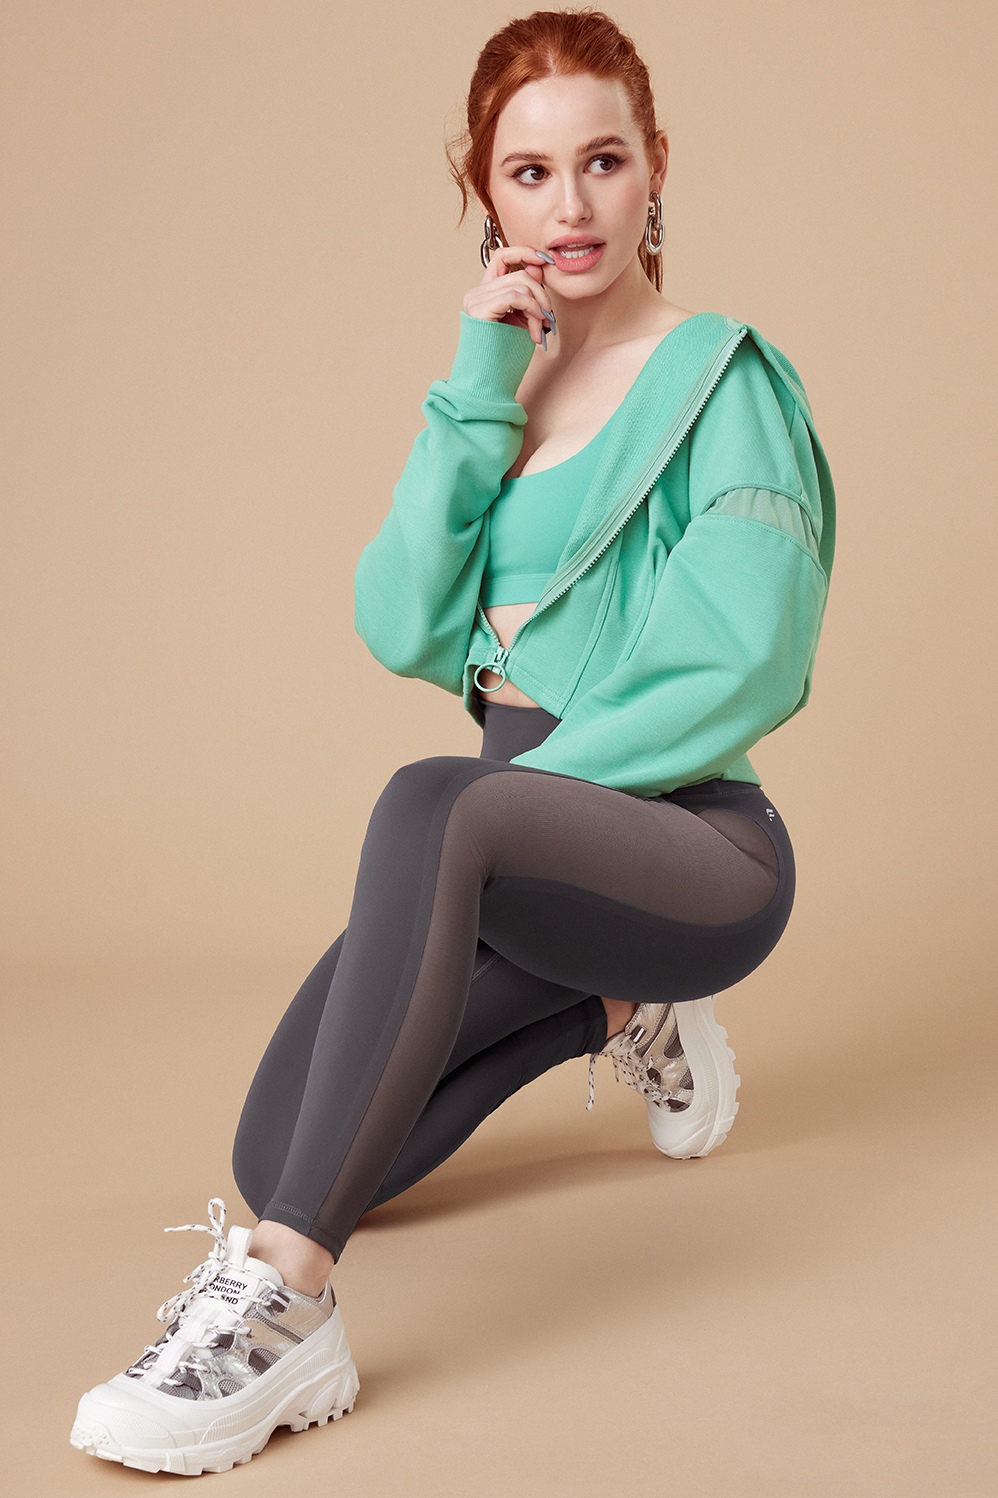 Madelaine Petsch - Fabletics x Madelaine (collection 2021) 